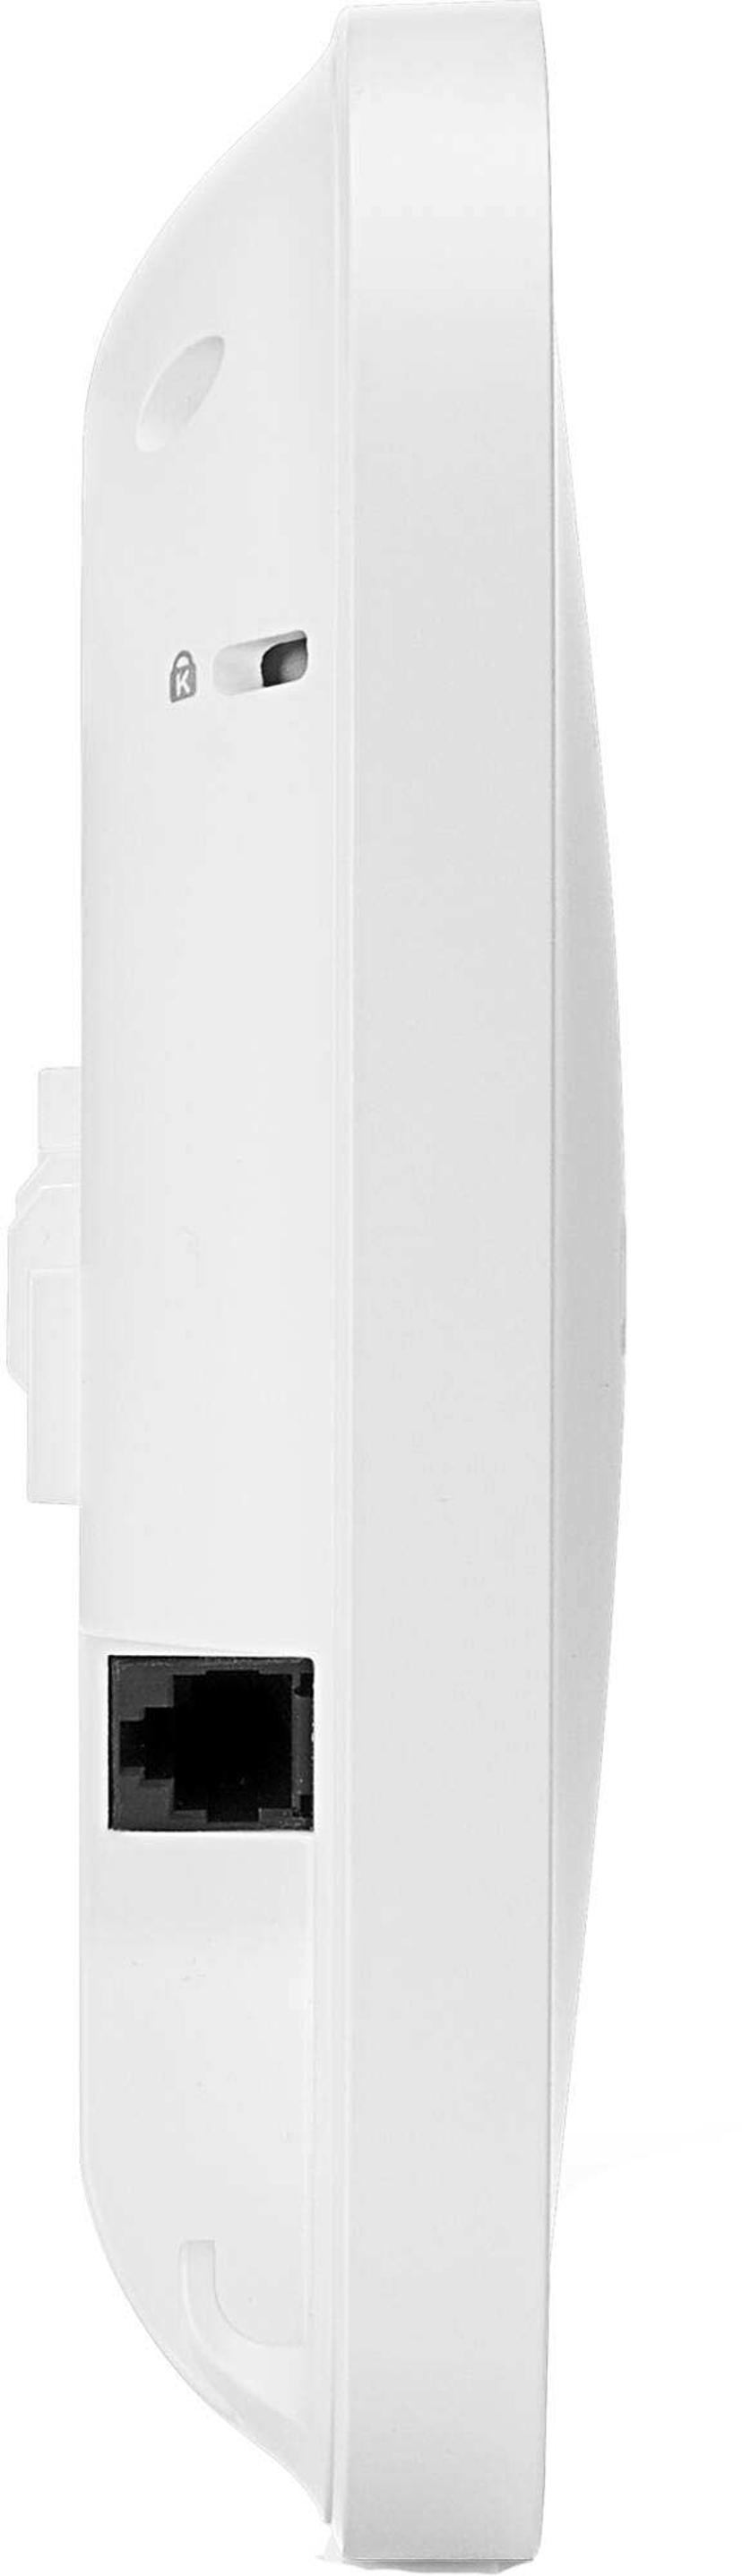 HPE Aruba Instant On AP22 Access Point bundle with PSU 12V/18W